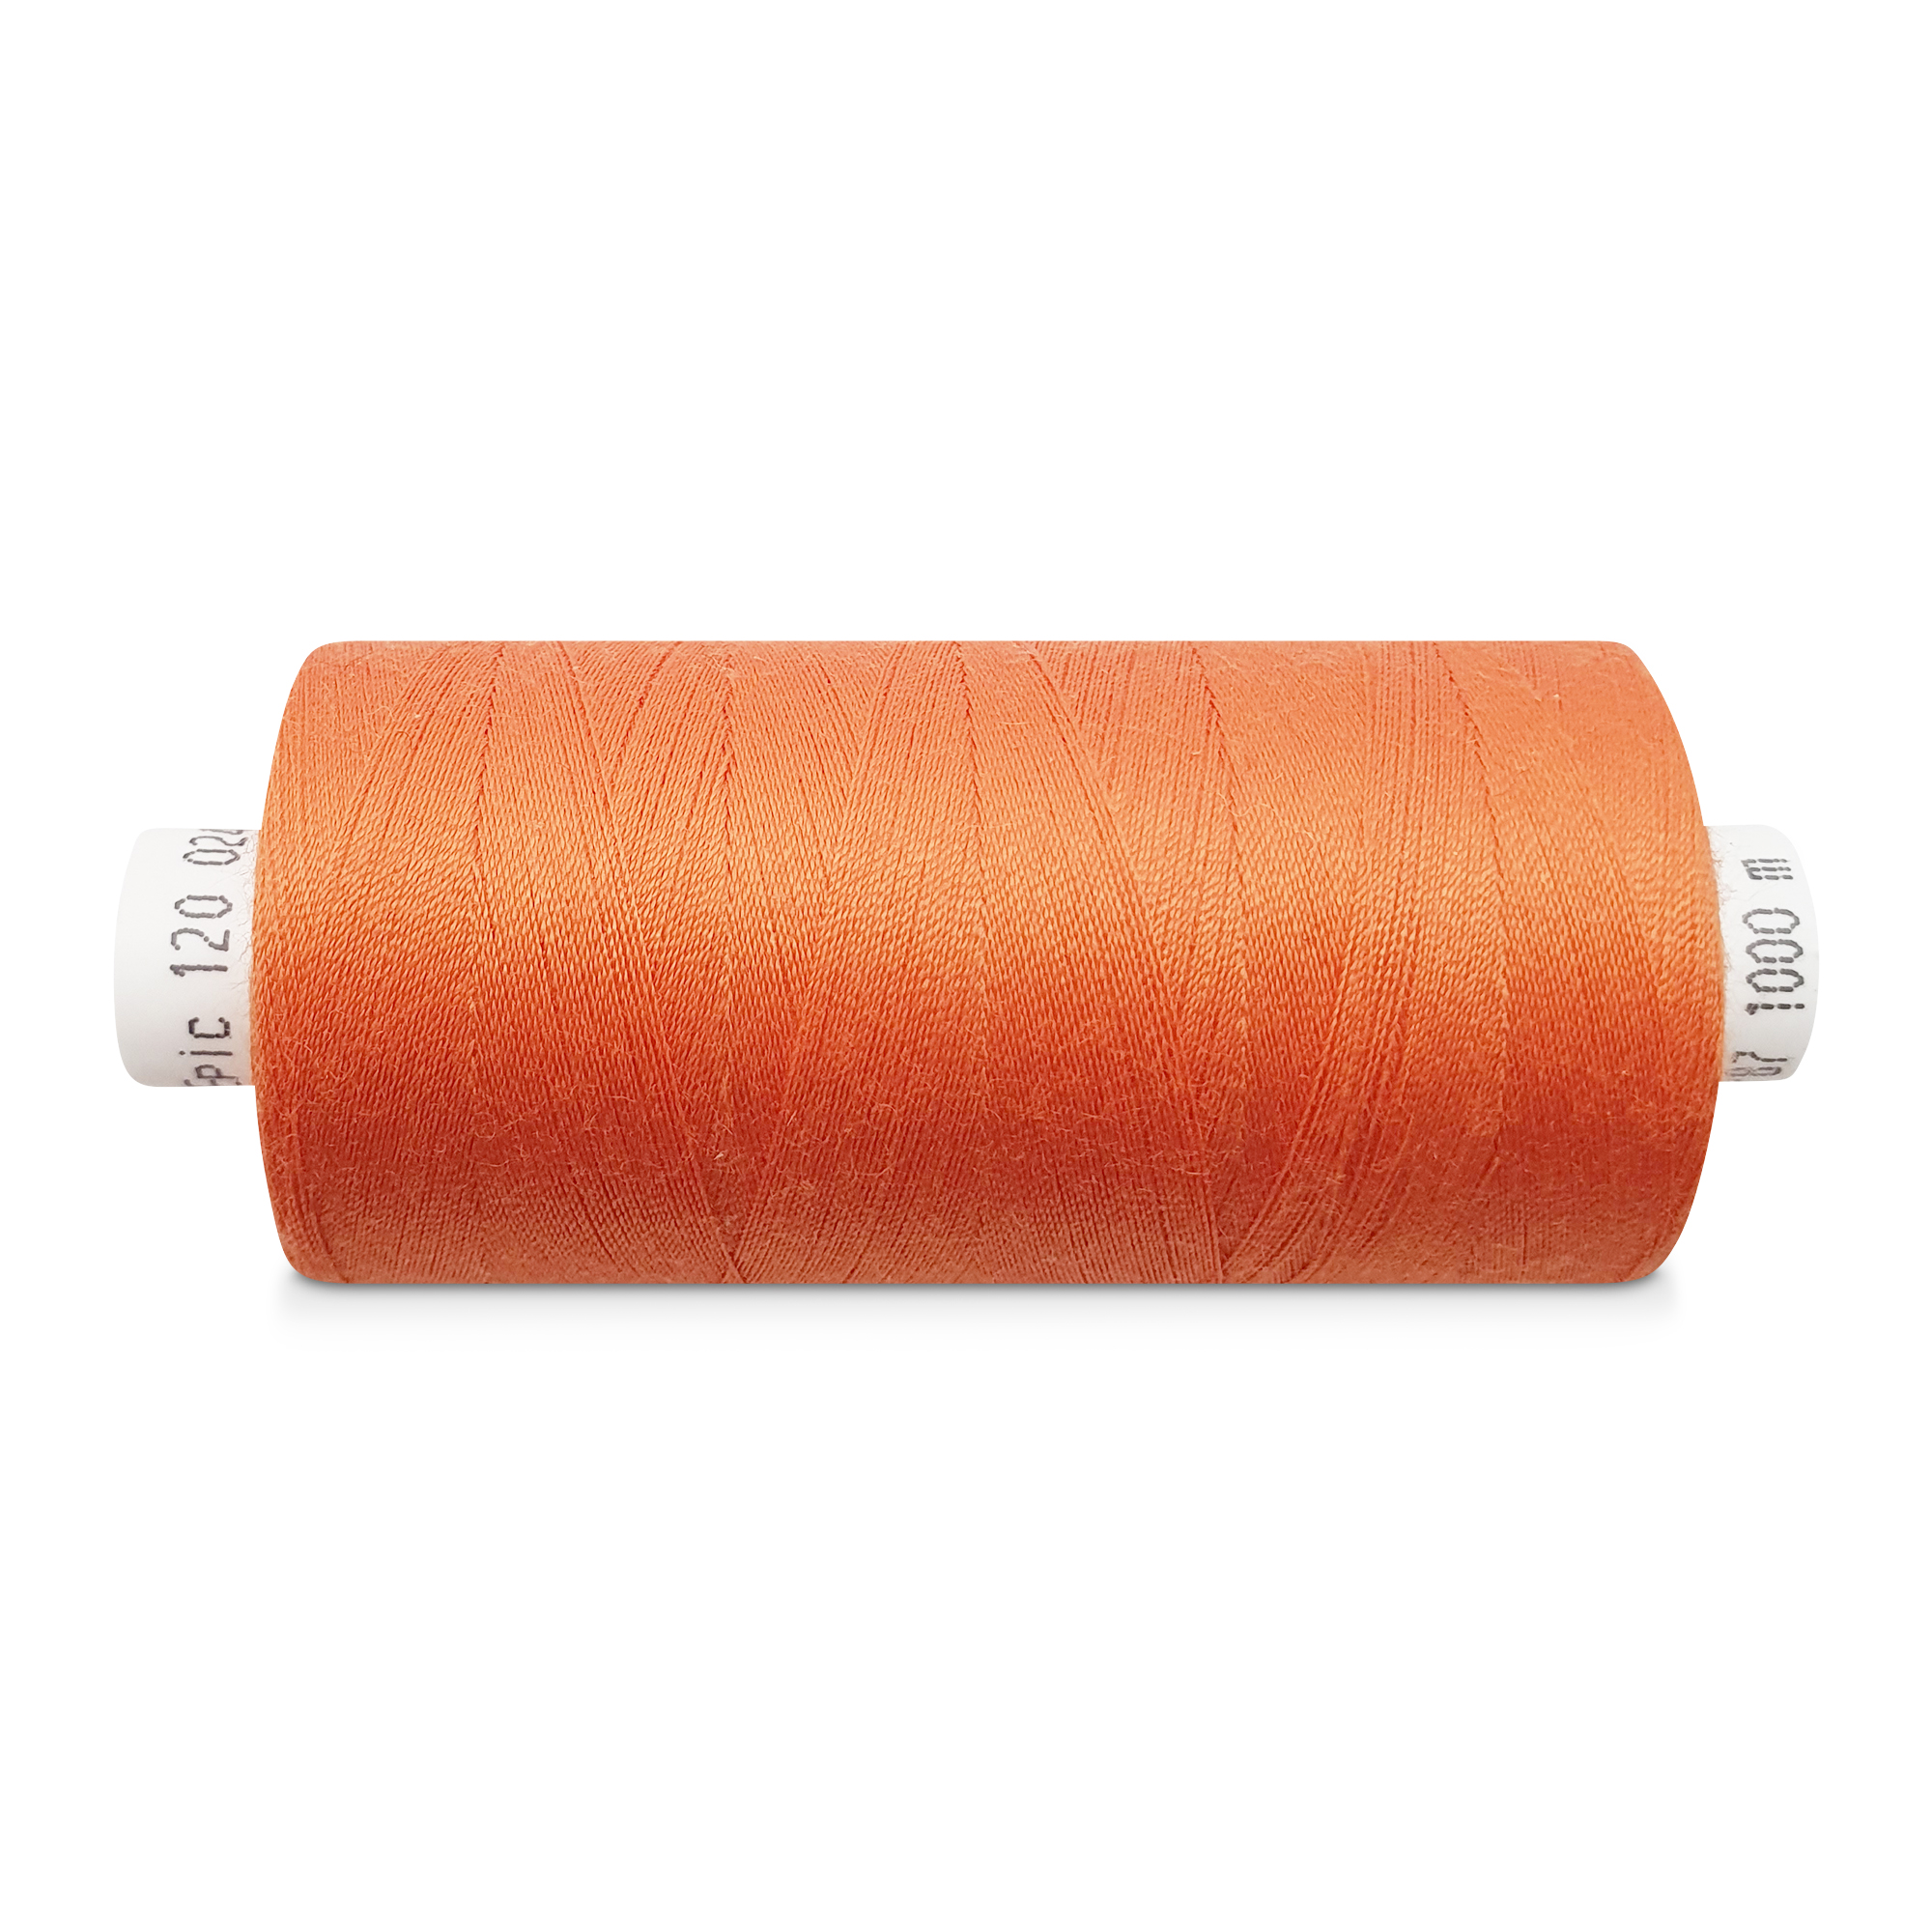 Jeans/Sewing thread pyracanth